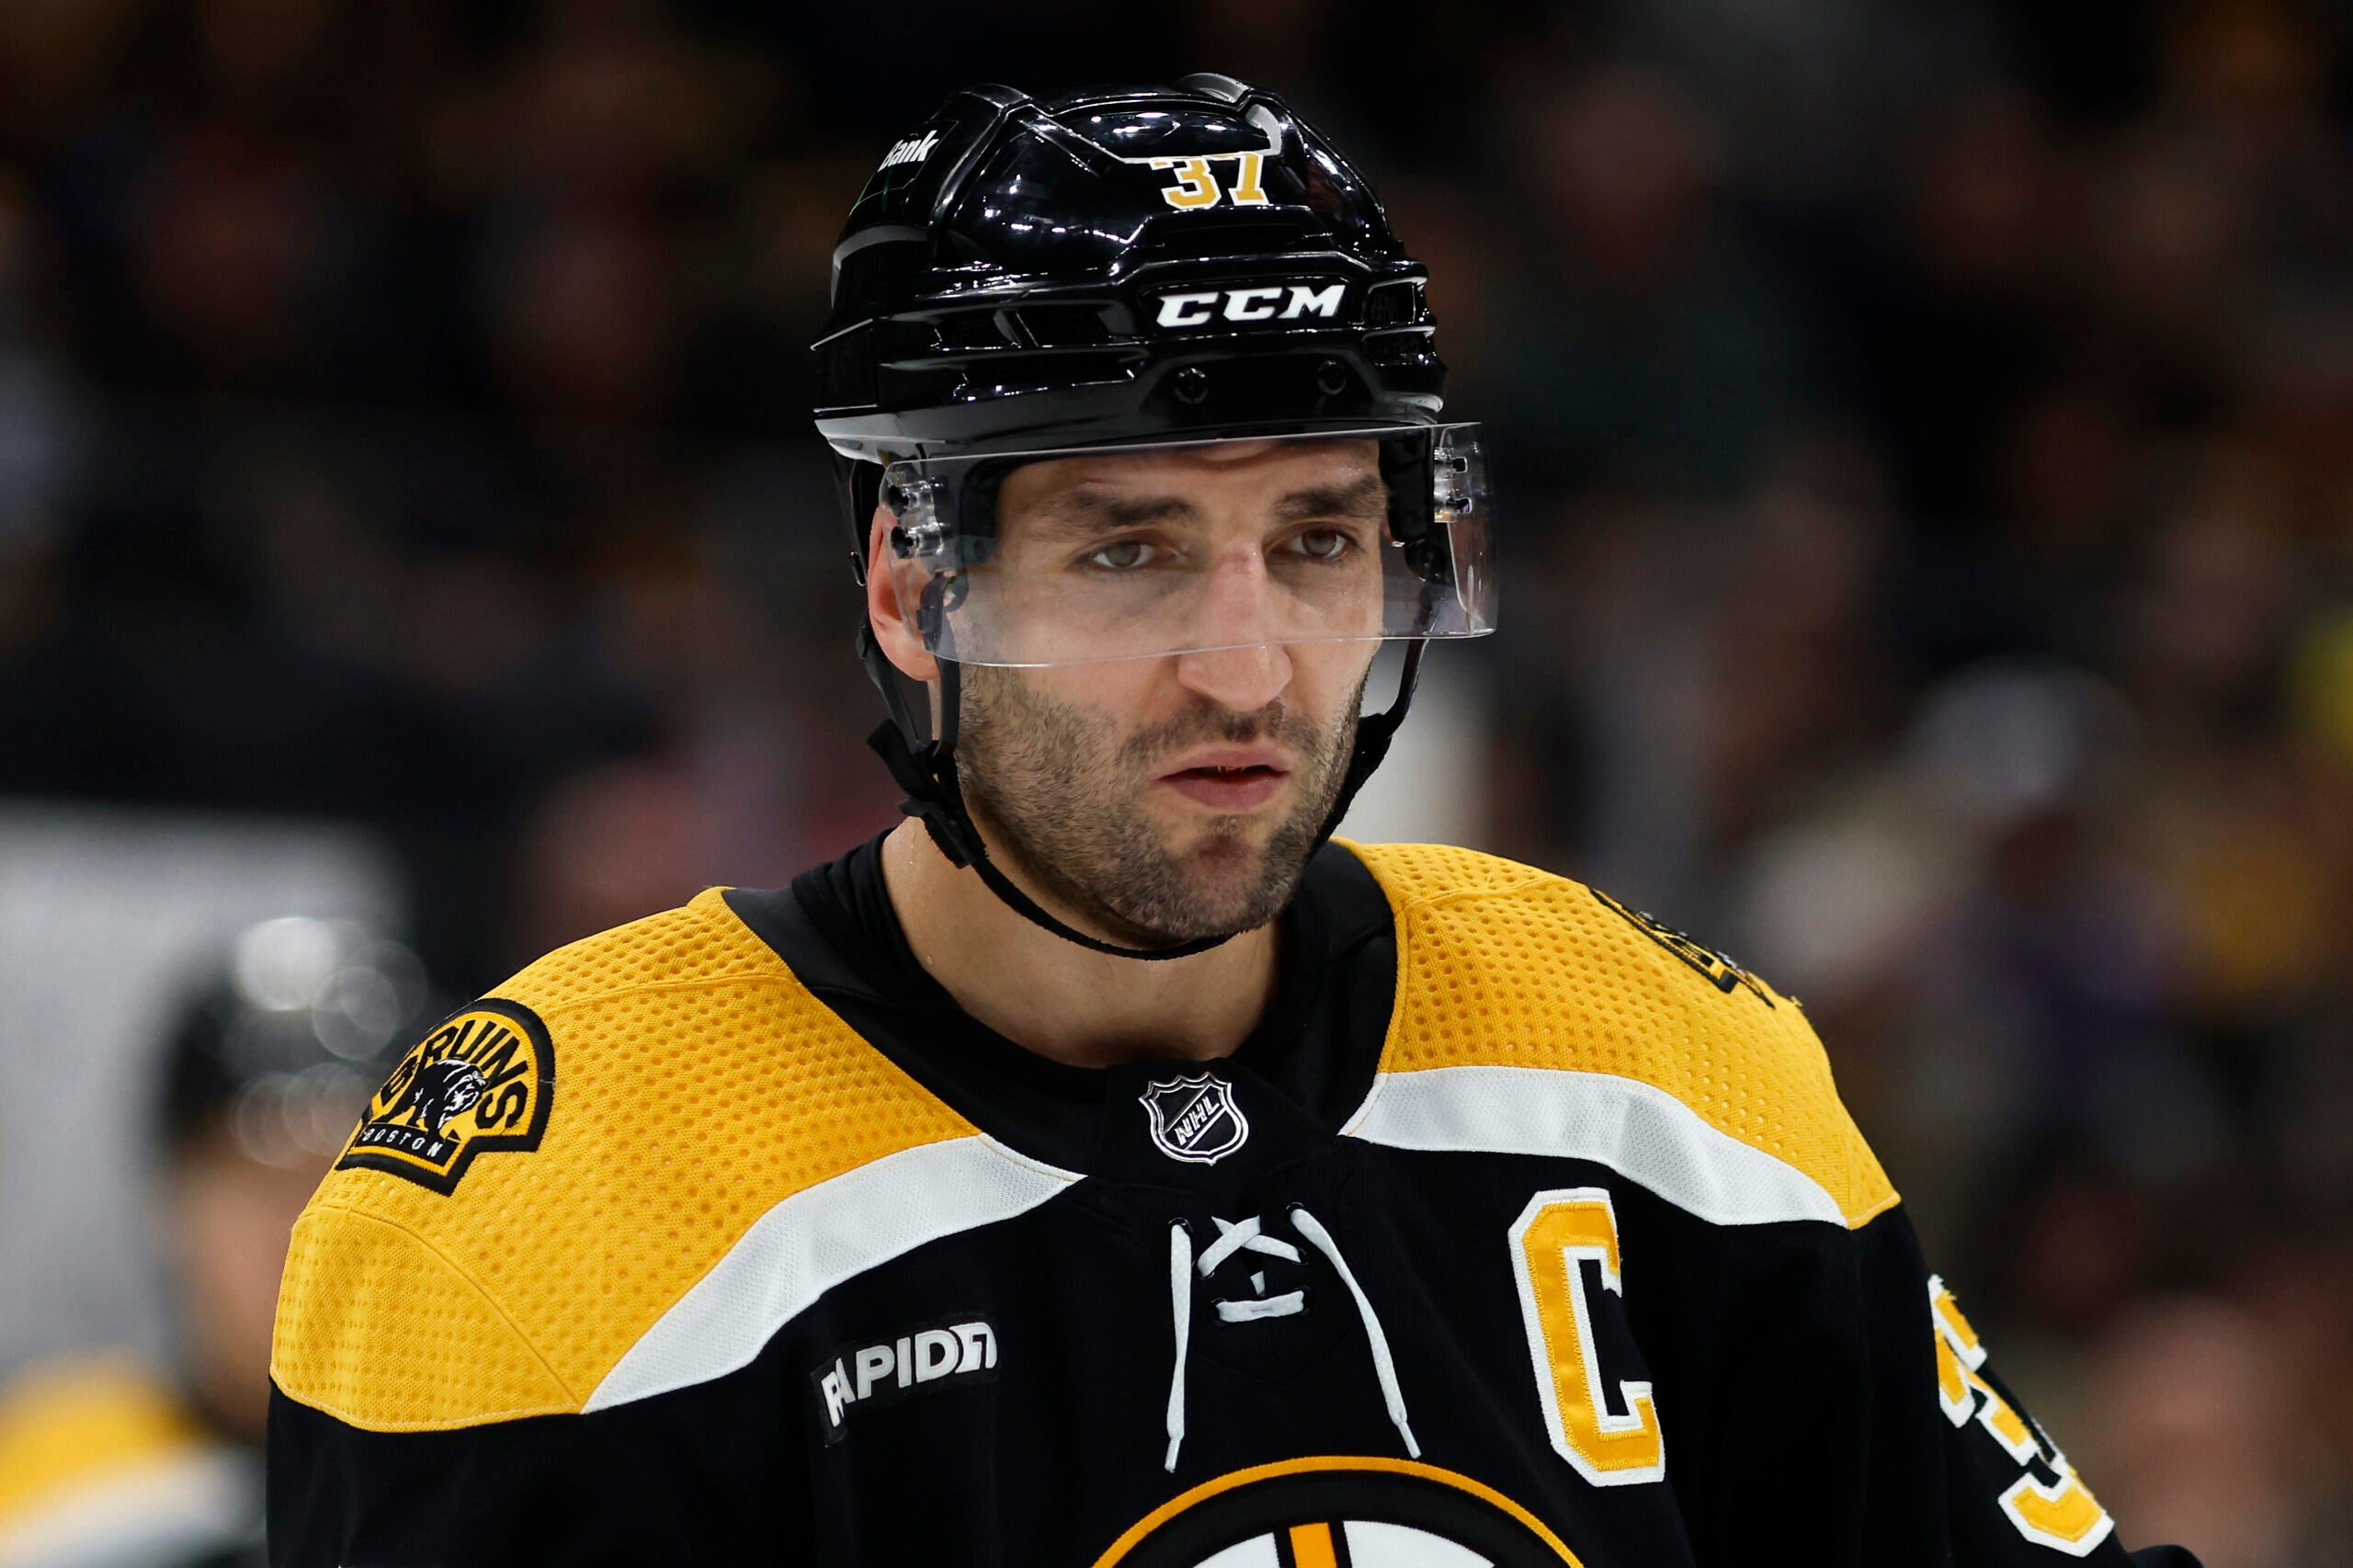 Boston Bruins' Patrice Bergeron during the third period of an NHL hockey game against the Vancouver Canucks Sunday, Nov. 13, 2022, in Boston.